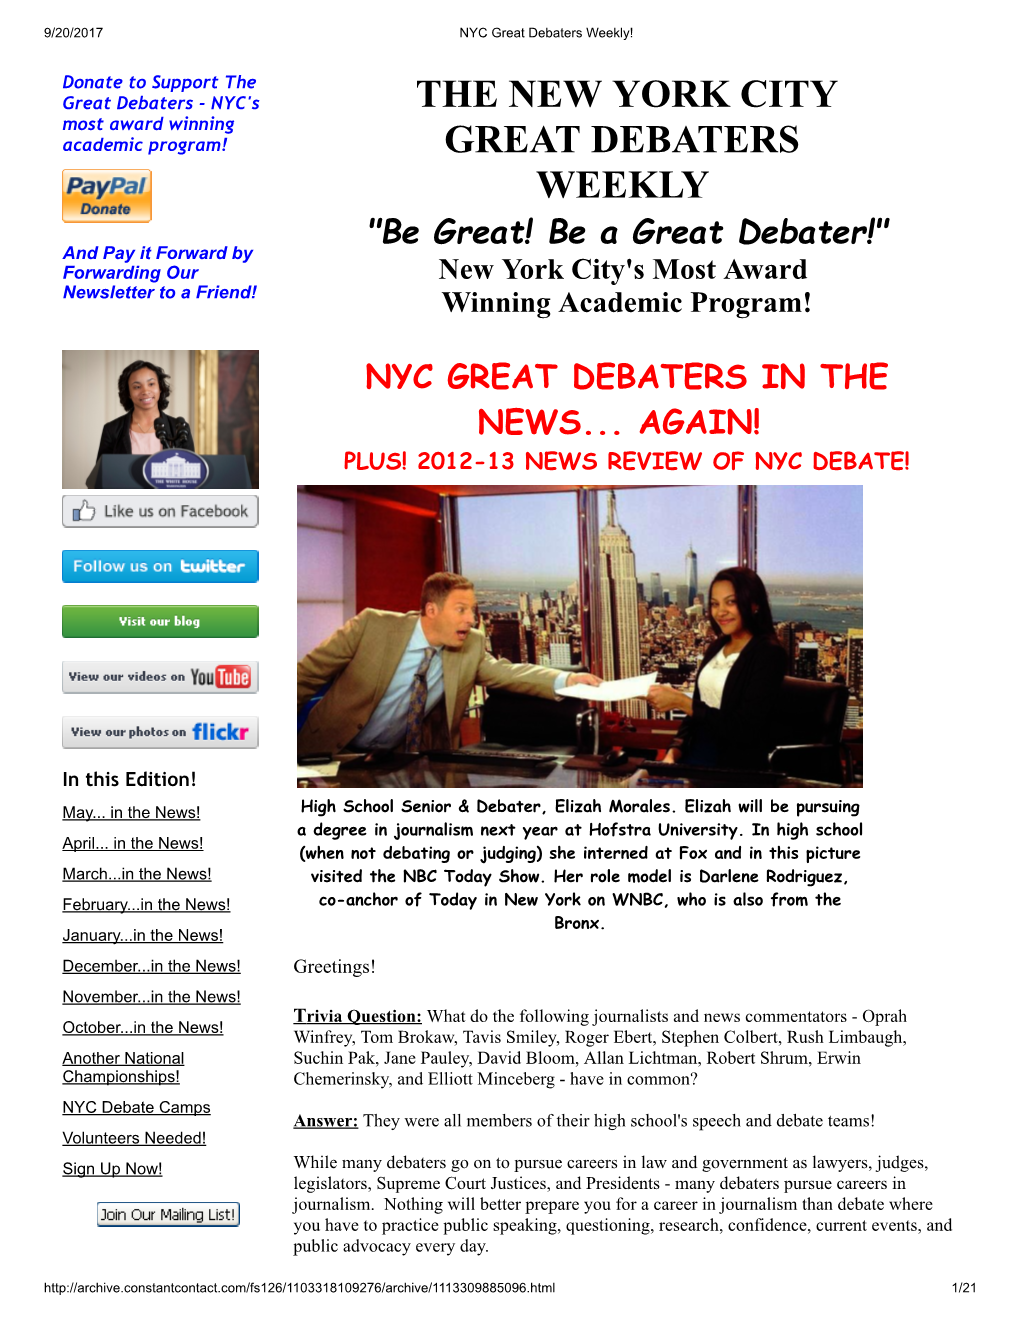 The New York City Great Debaters Weekly